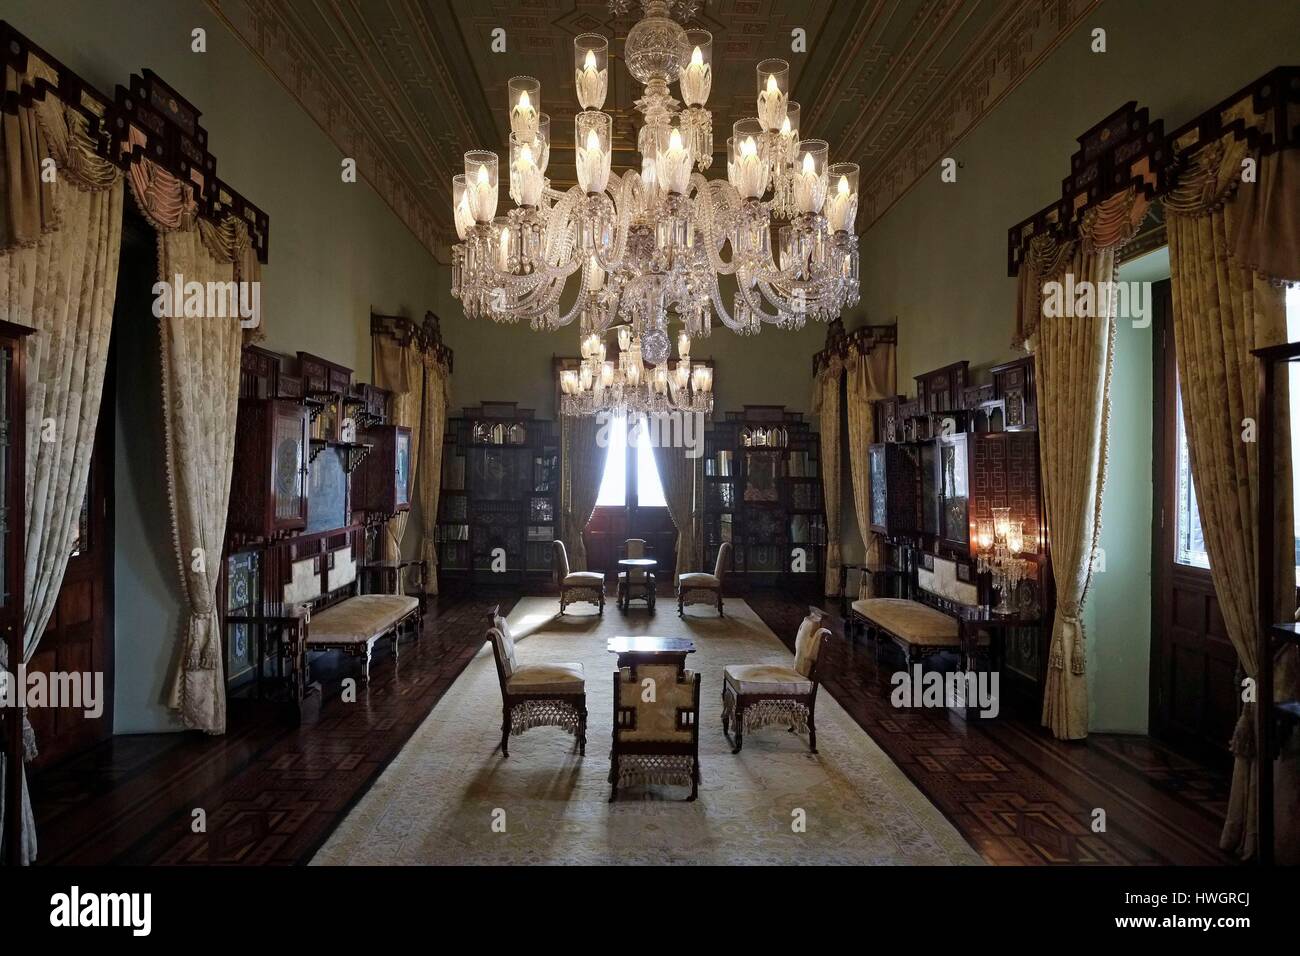 India, state of Telangana, Hyderabad, the Falaknuma Palace was once owned by the Nizam of Hyderabad, it is now a hotel, Stock Photo